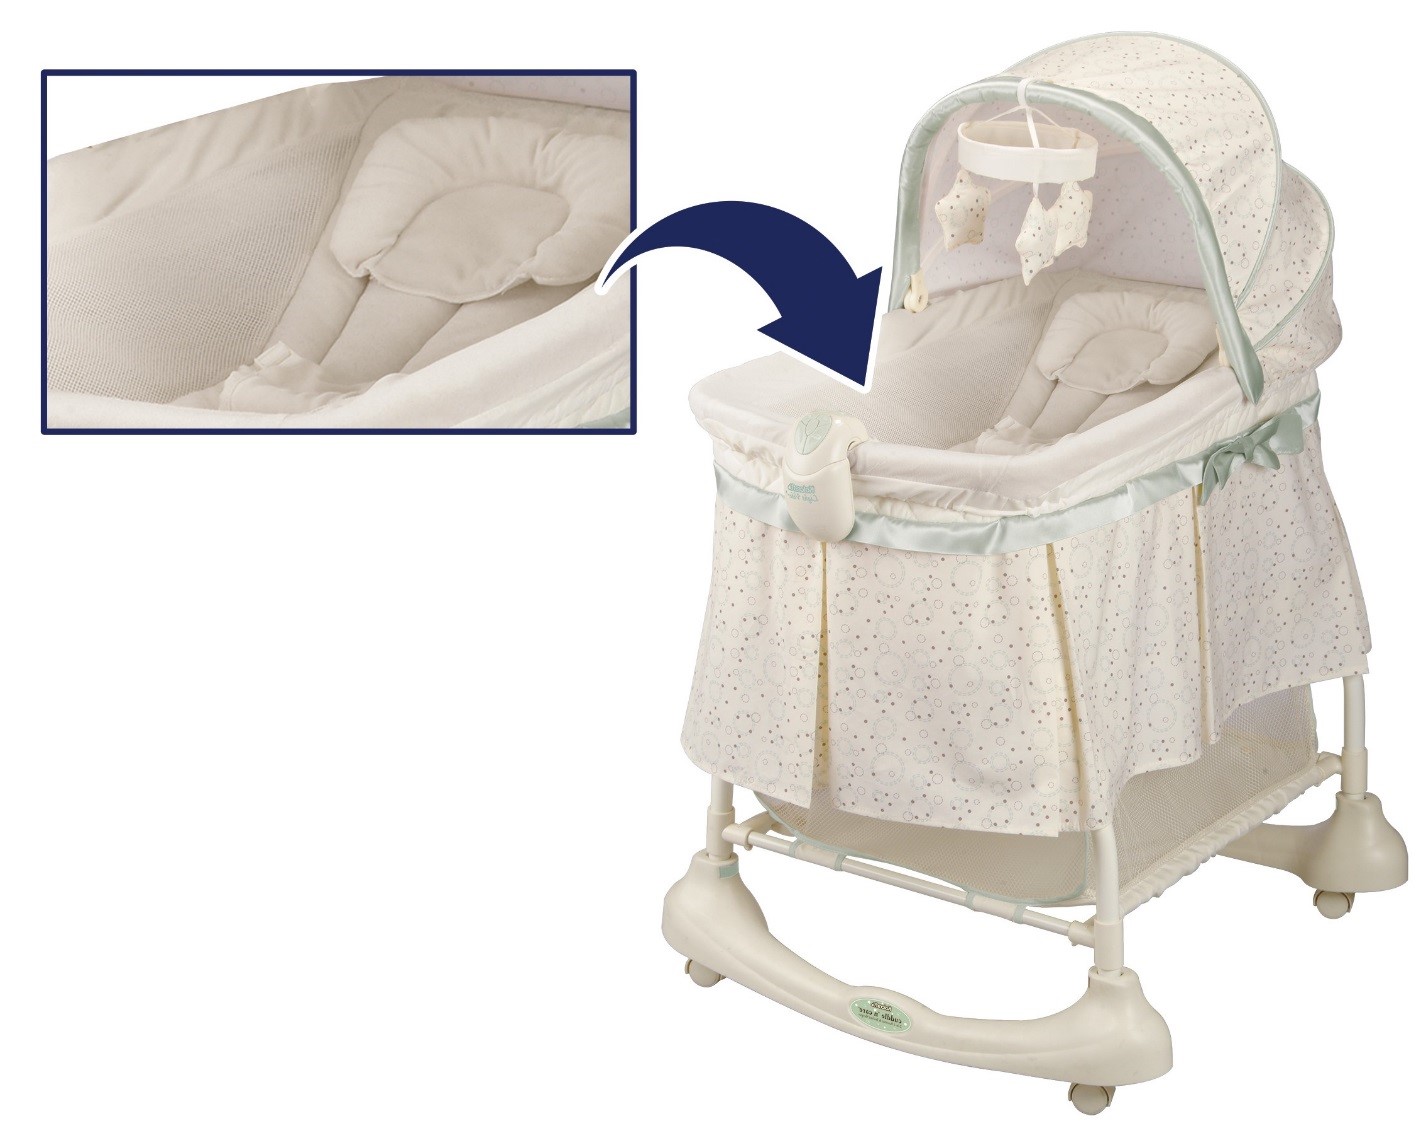 inclined bassinet